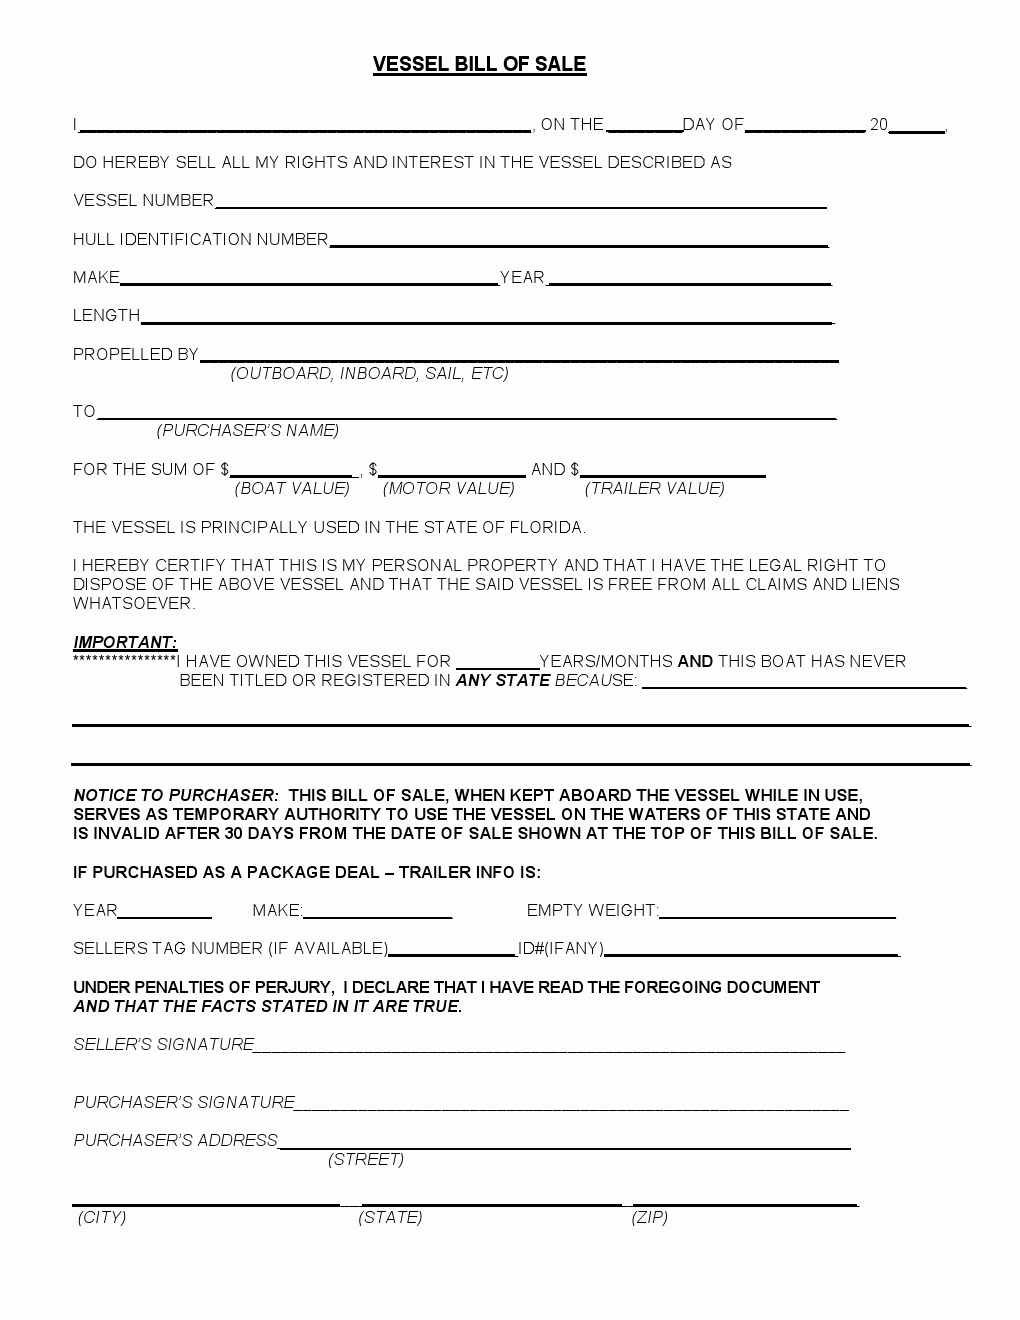 Bill Of Sale for Trailers Best Of Free Florida Vessel Bill Of Sale form Download Pdf